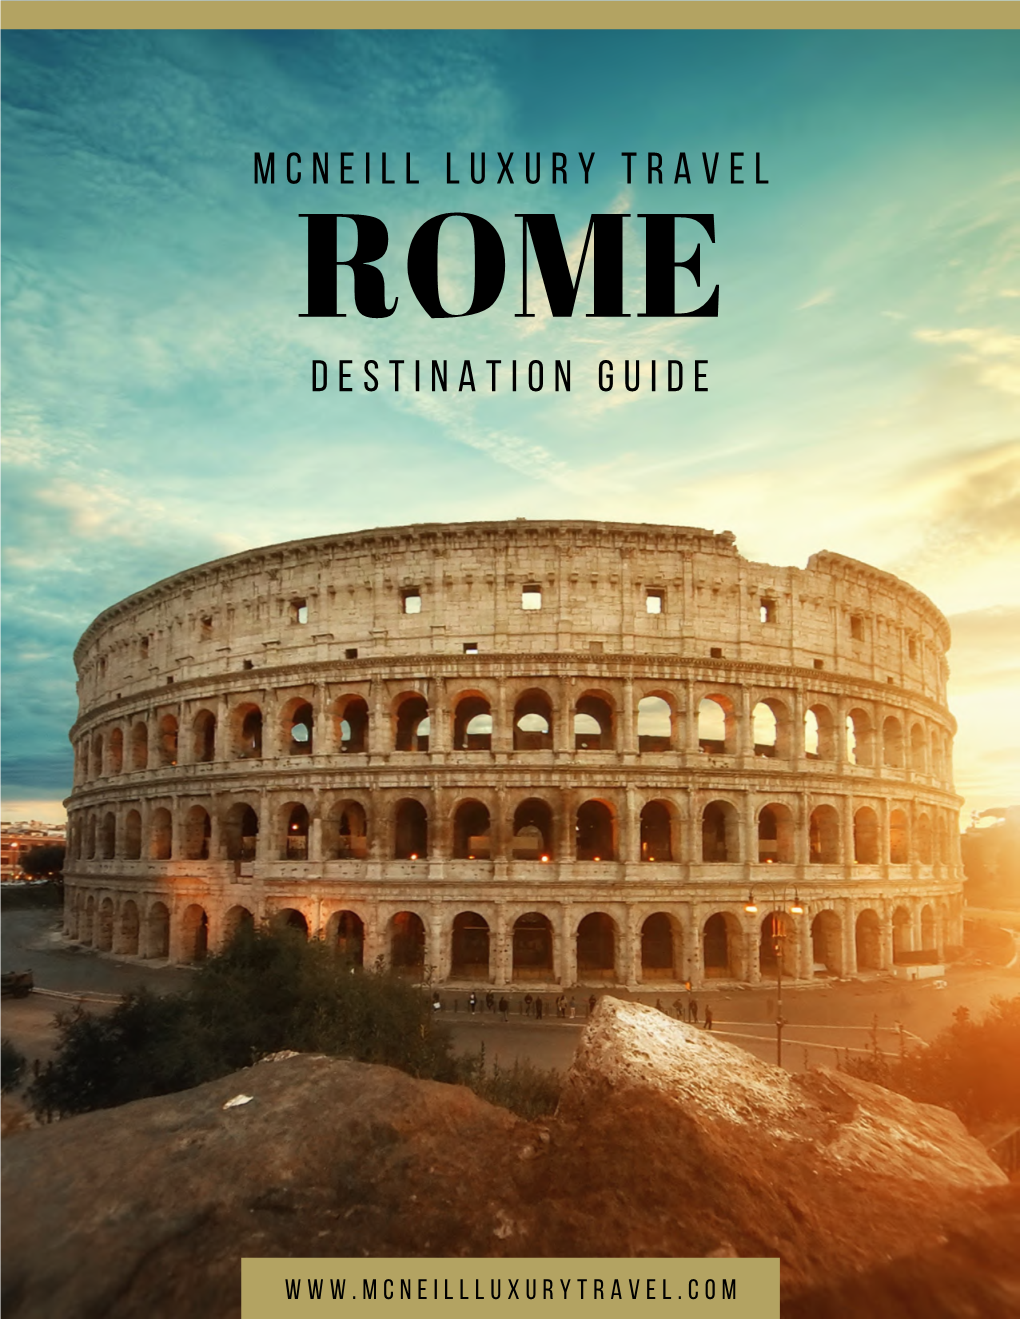 ROME Destination Guide, Courtesy of MCNEILL LUXURY TRAVEL